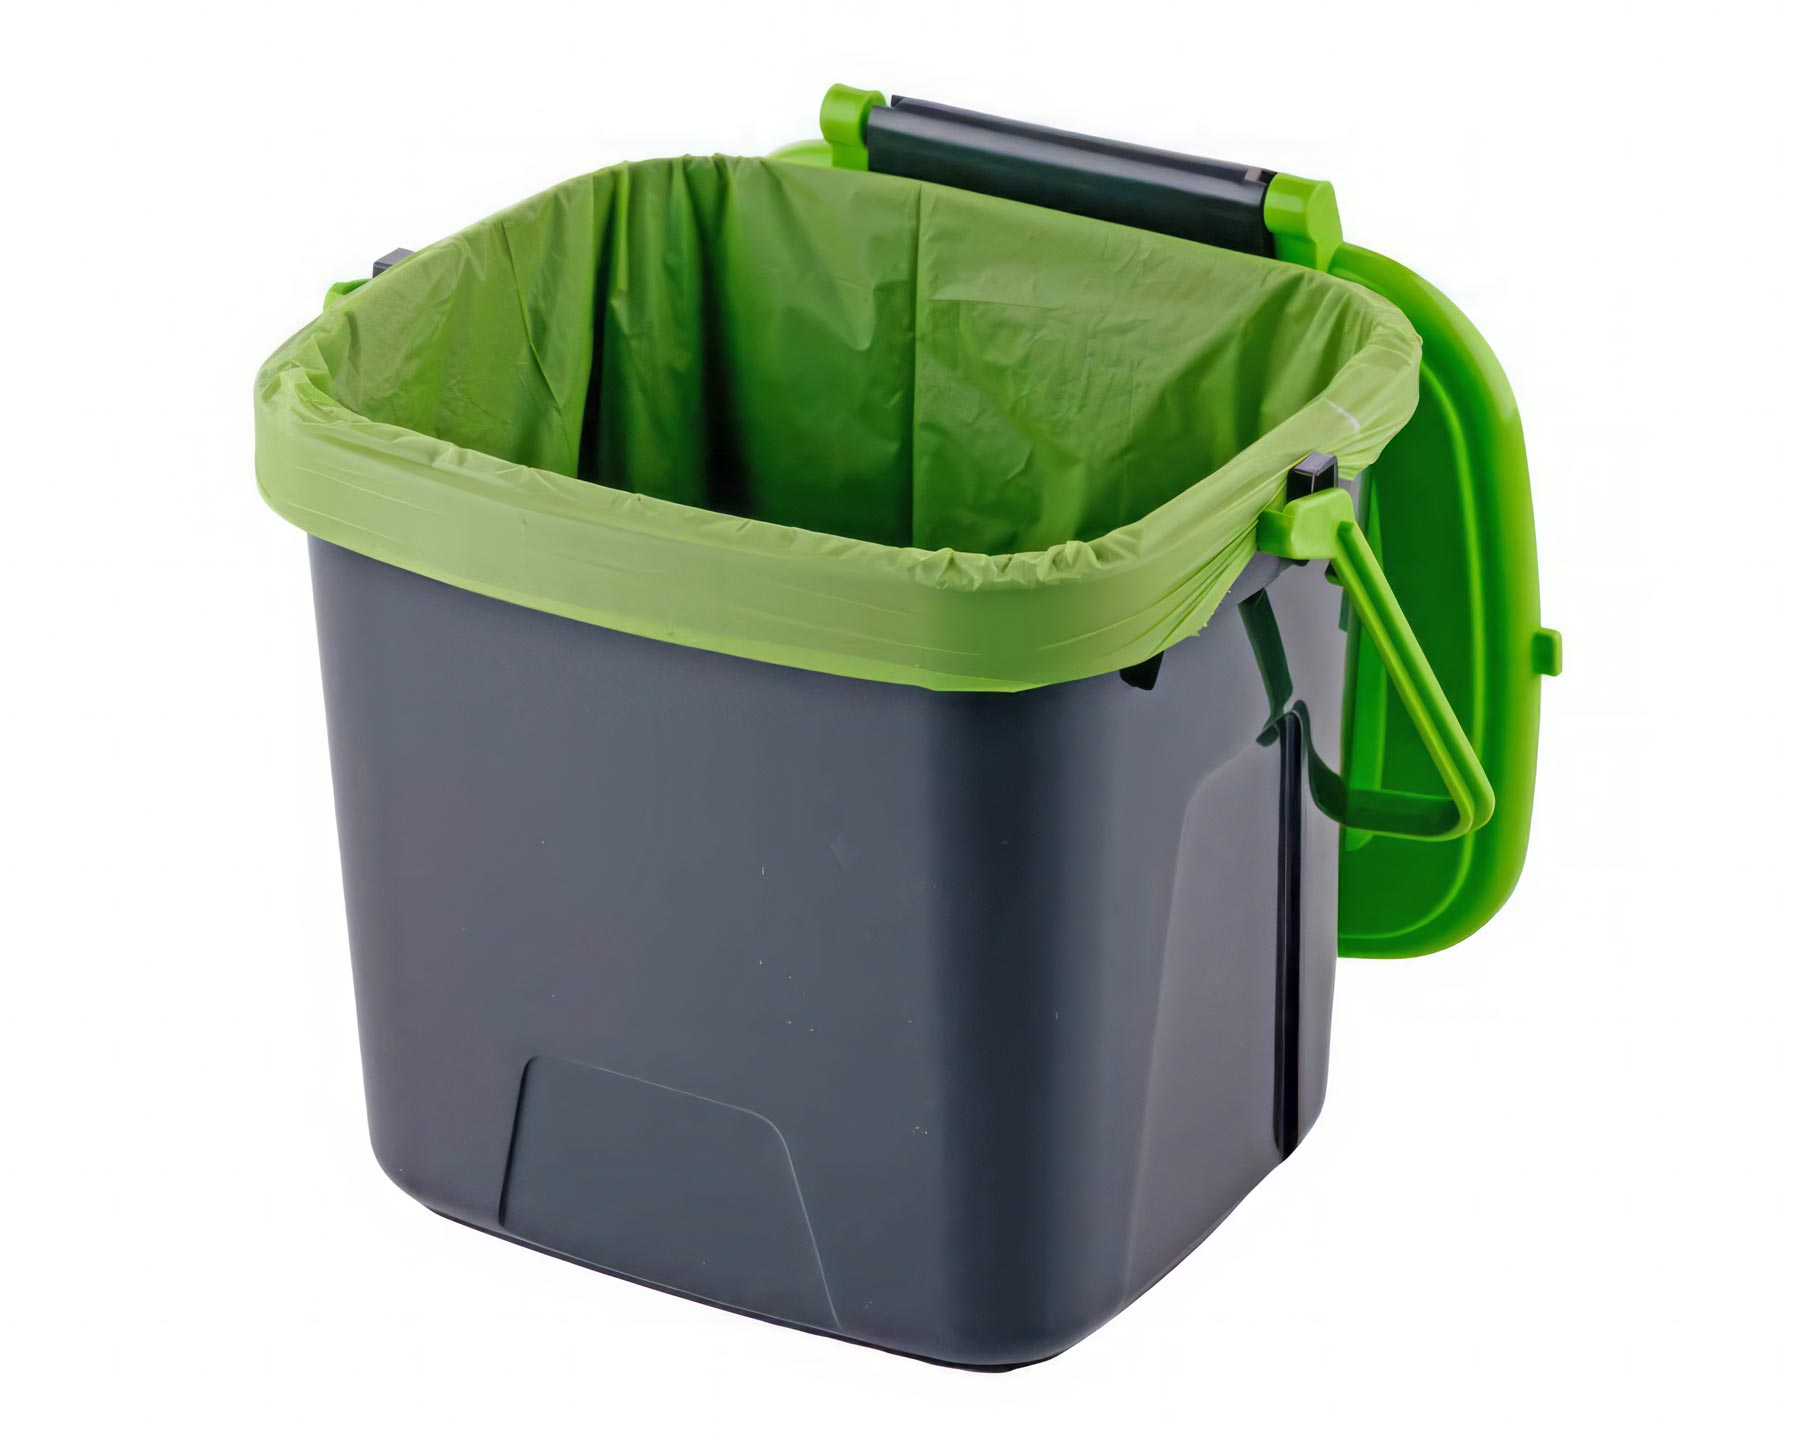 7L Compostable Bag (use with 7L Compost Caddy)